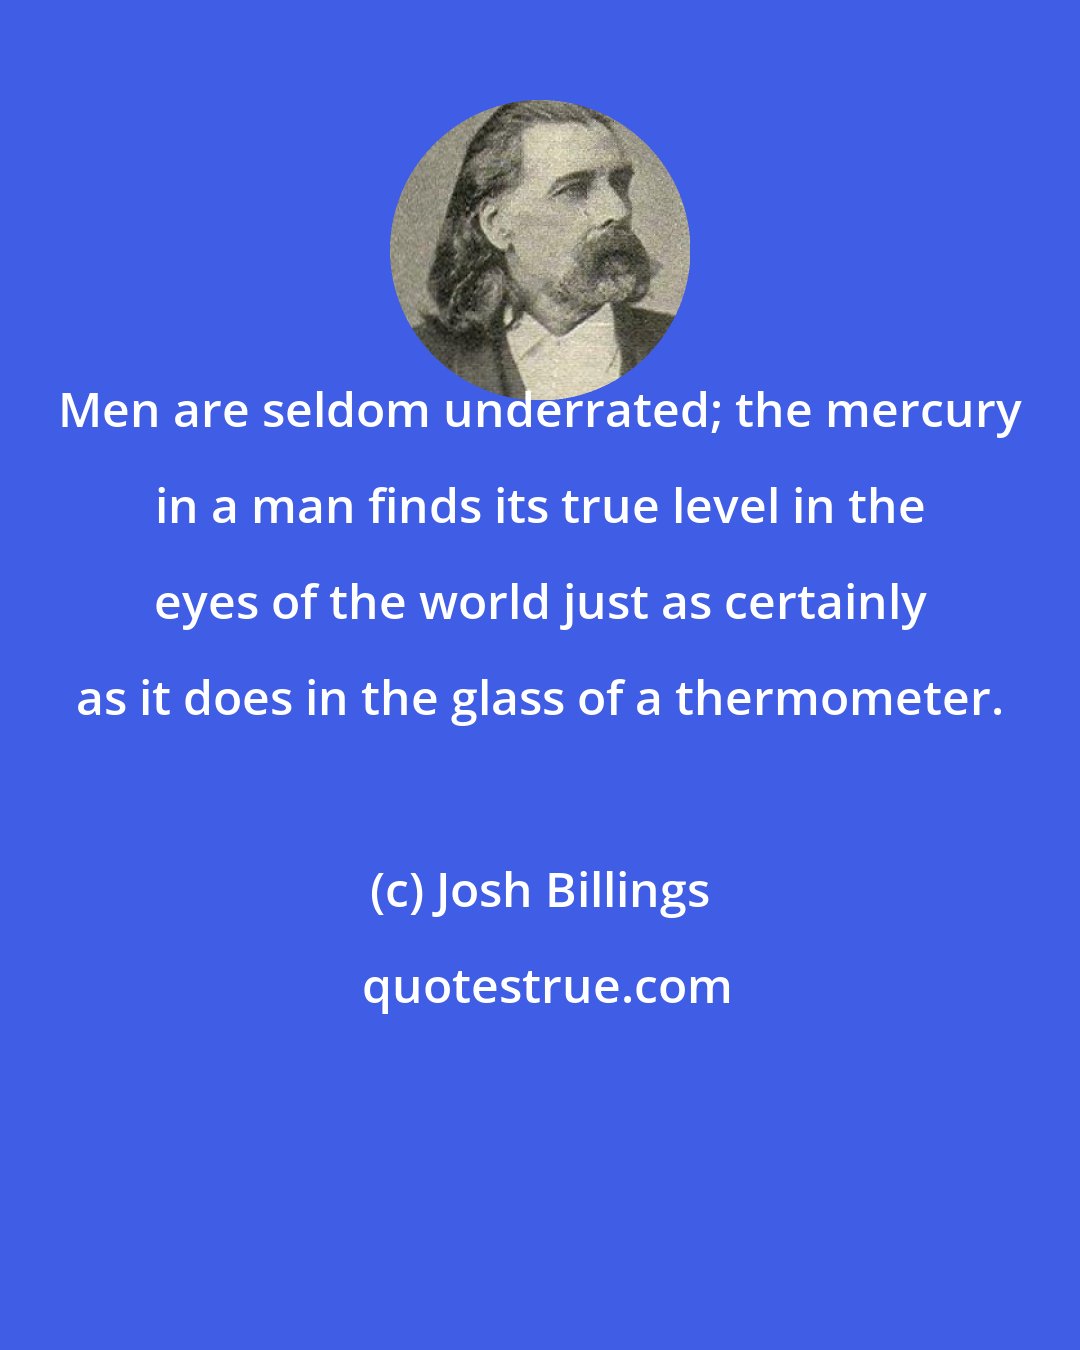 Josh Billings: Men are seldom underrated; the mercury in a man finds its true level in the eyes of the world just as certainly as it does in the glass of a thermometer.